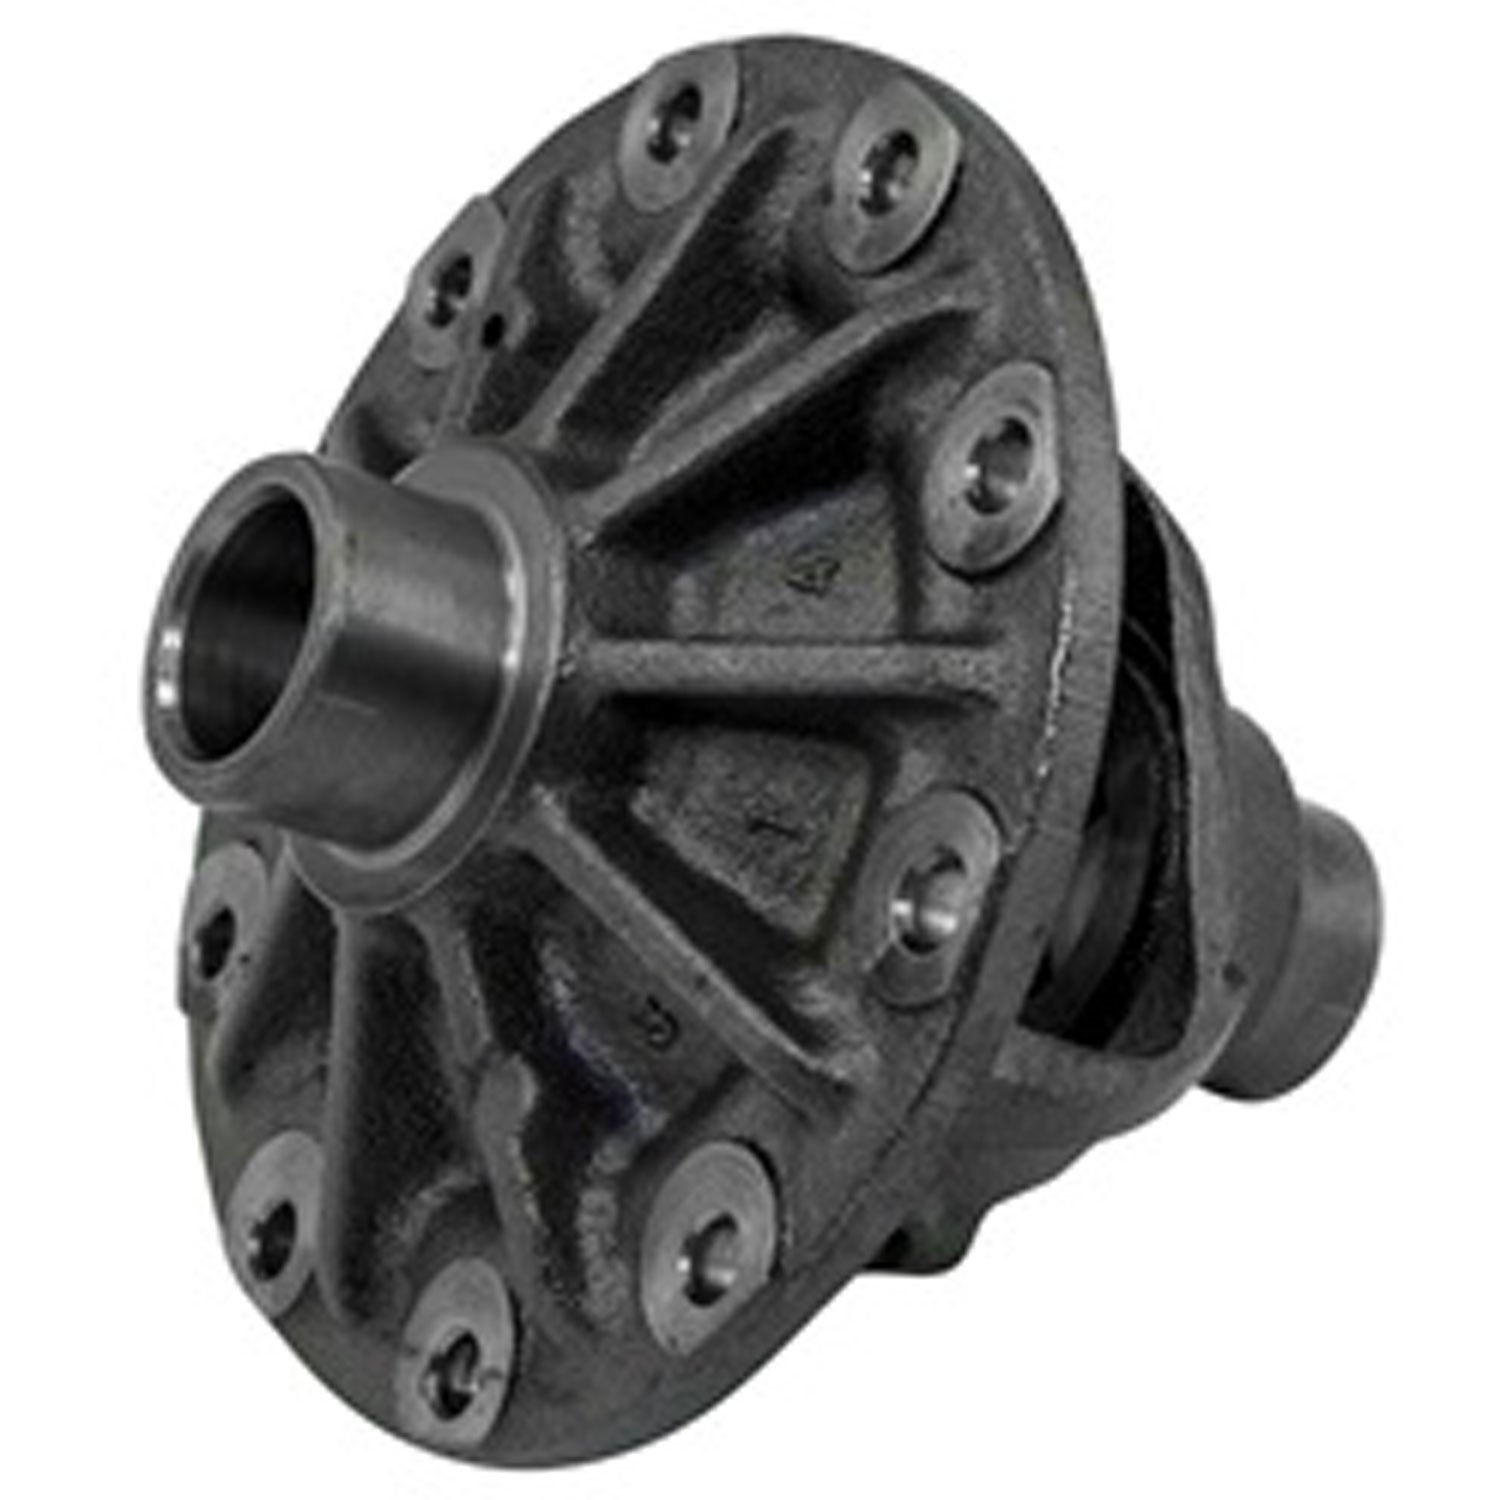 This rear differential carrier from Omix-ADA is for Dana 44 72-75 Jeep CJ5 72-75 CJ6 and 1986 CJ7. Accepts 3.92 to 5.38 ratios.